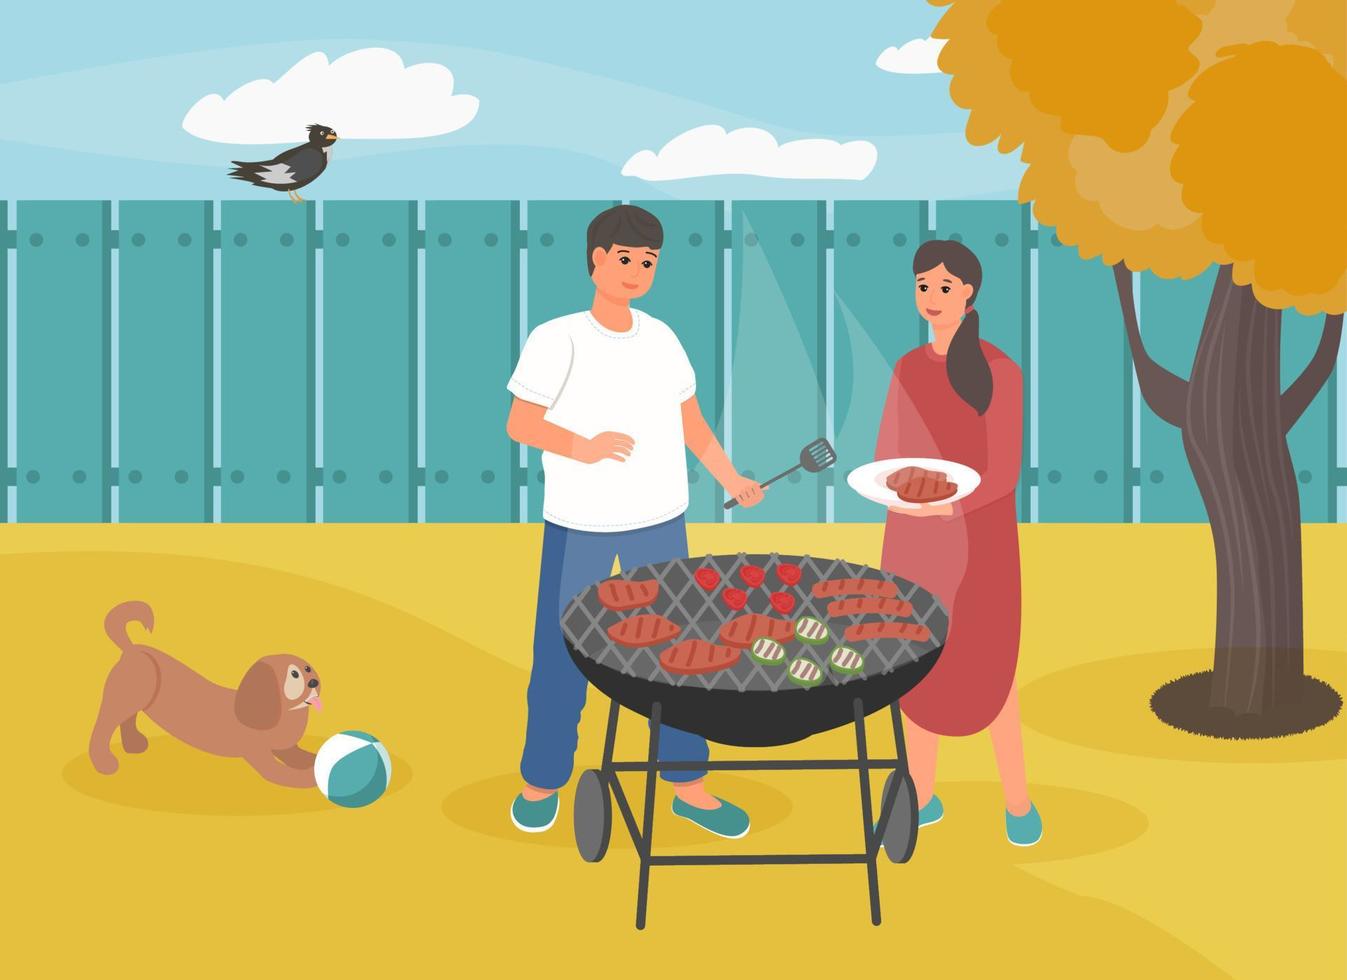 Autumn barbeque party. Backyard of the house. Cute couple preparing food on girl. BBQ time. Sunny autumn day. Vector illustration.